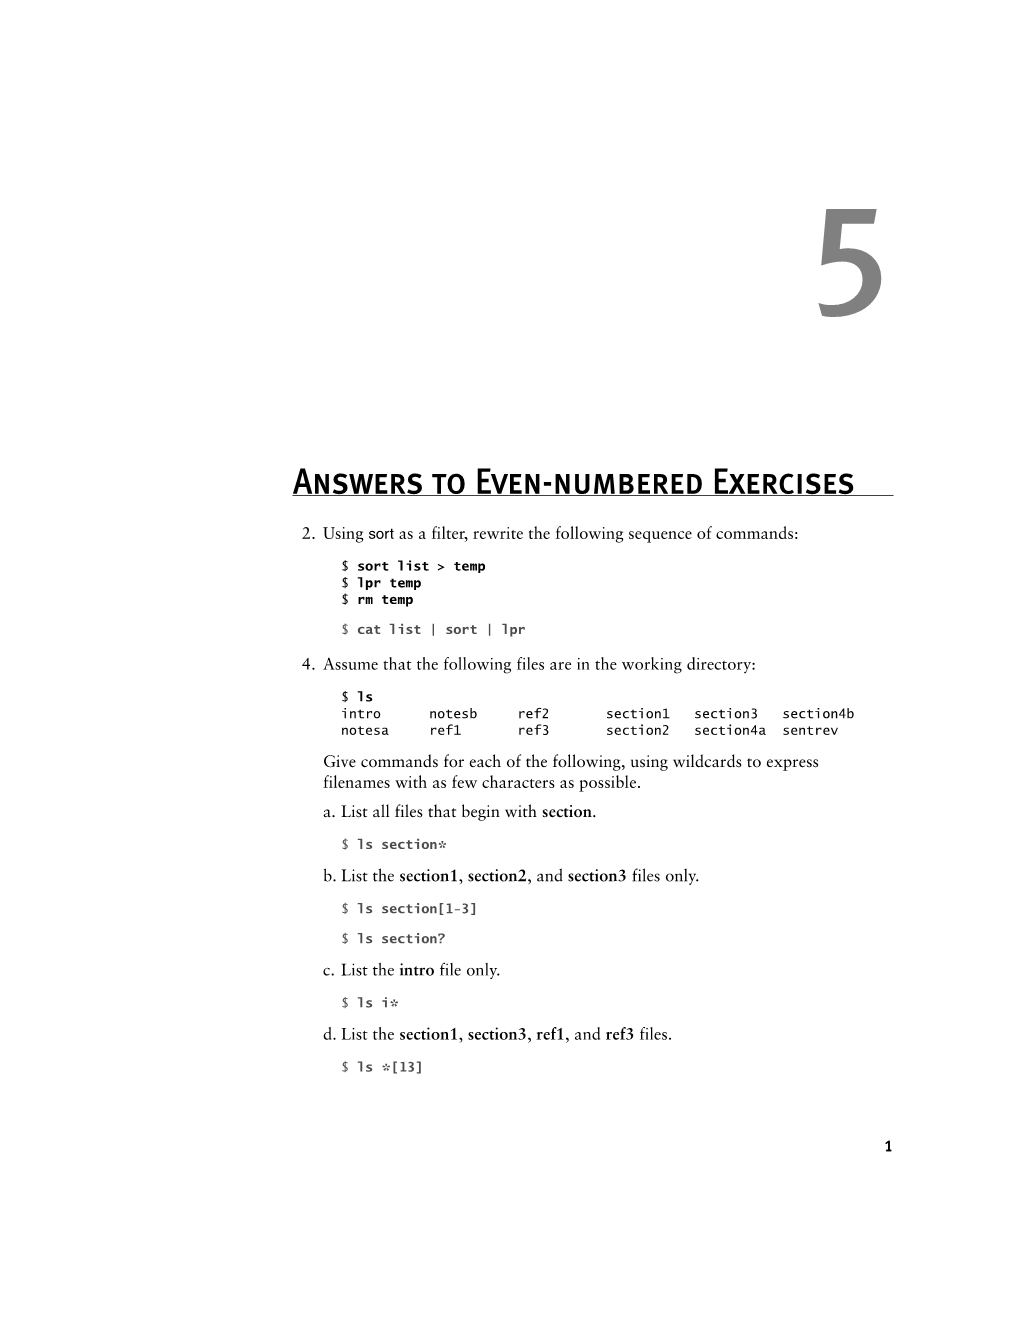 Answers to Even-Numbered Exercises